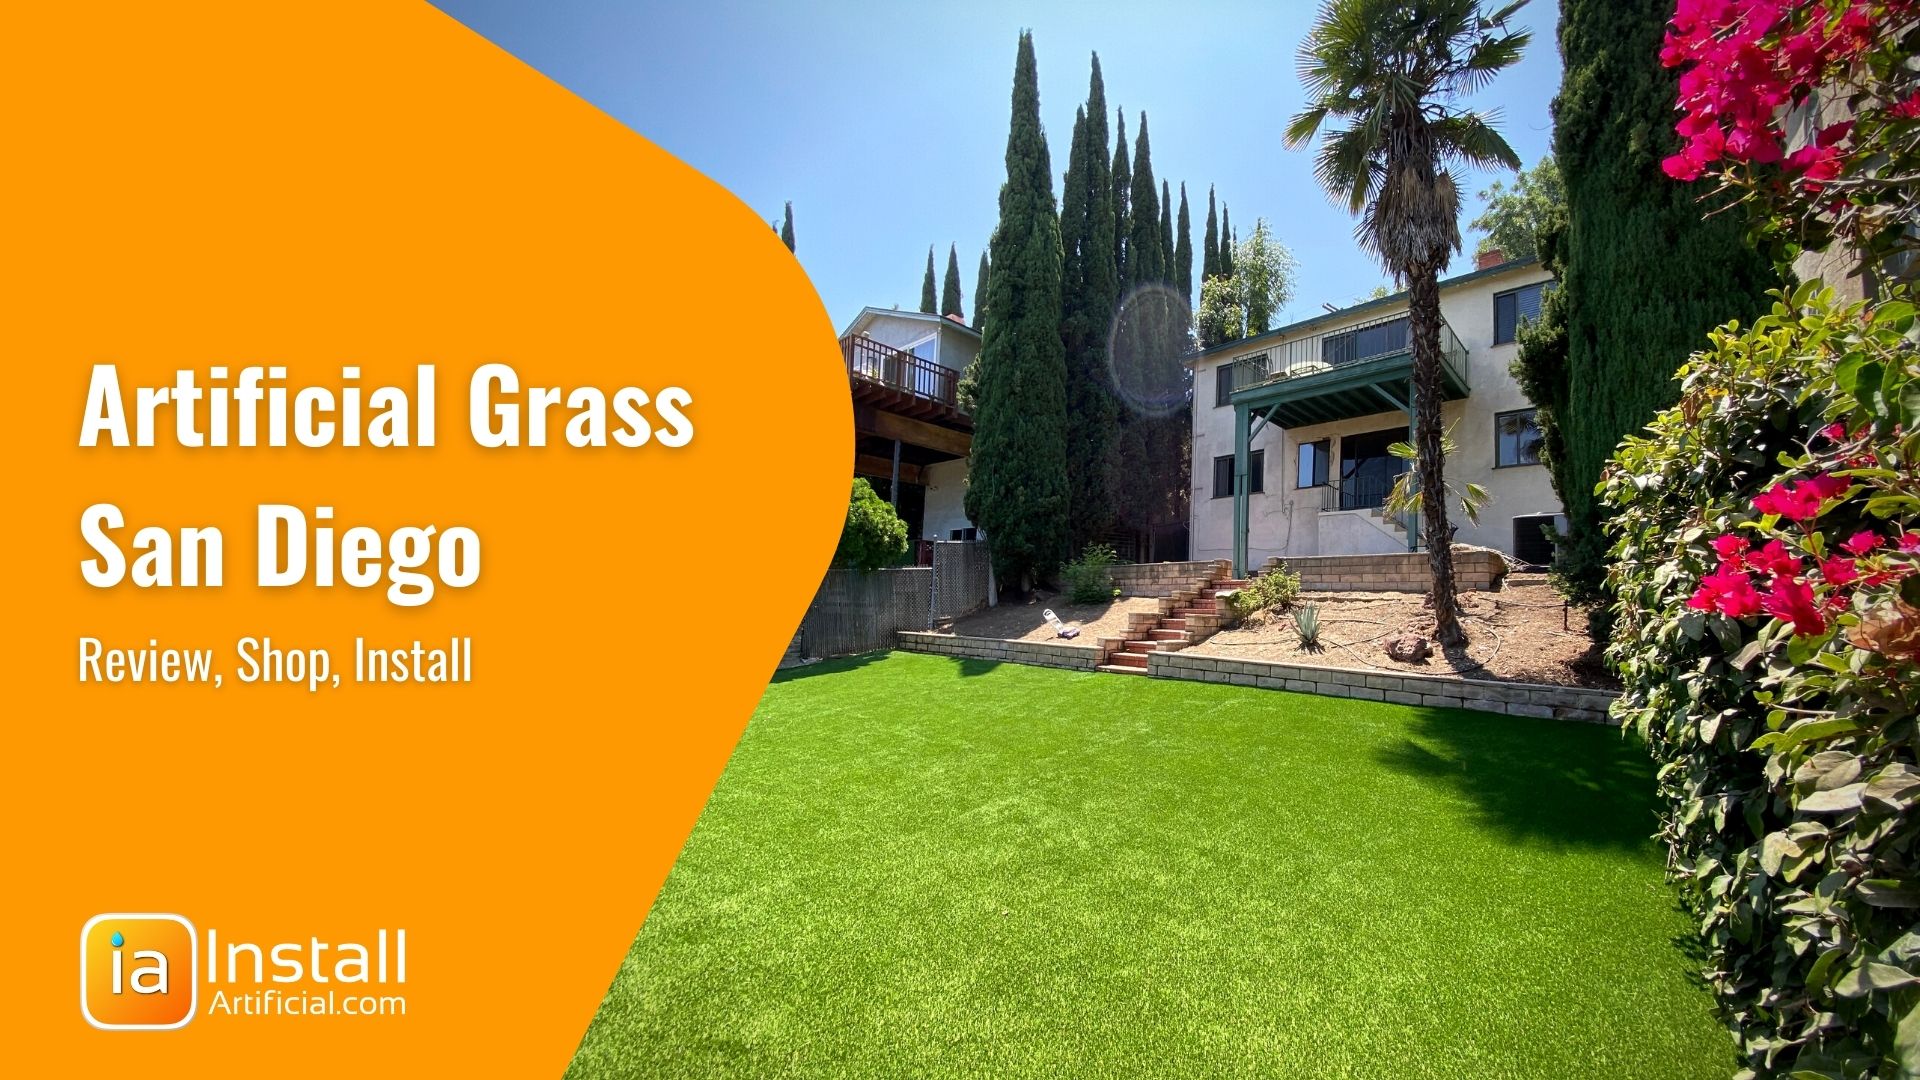 Replace Your Lawn With Artificial Turf in San Diego